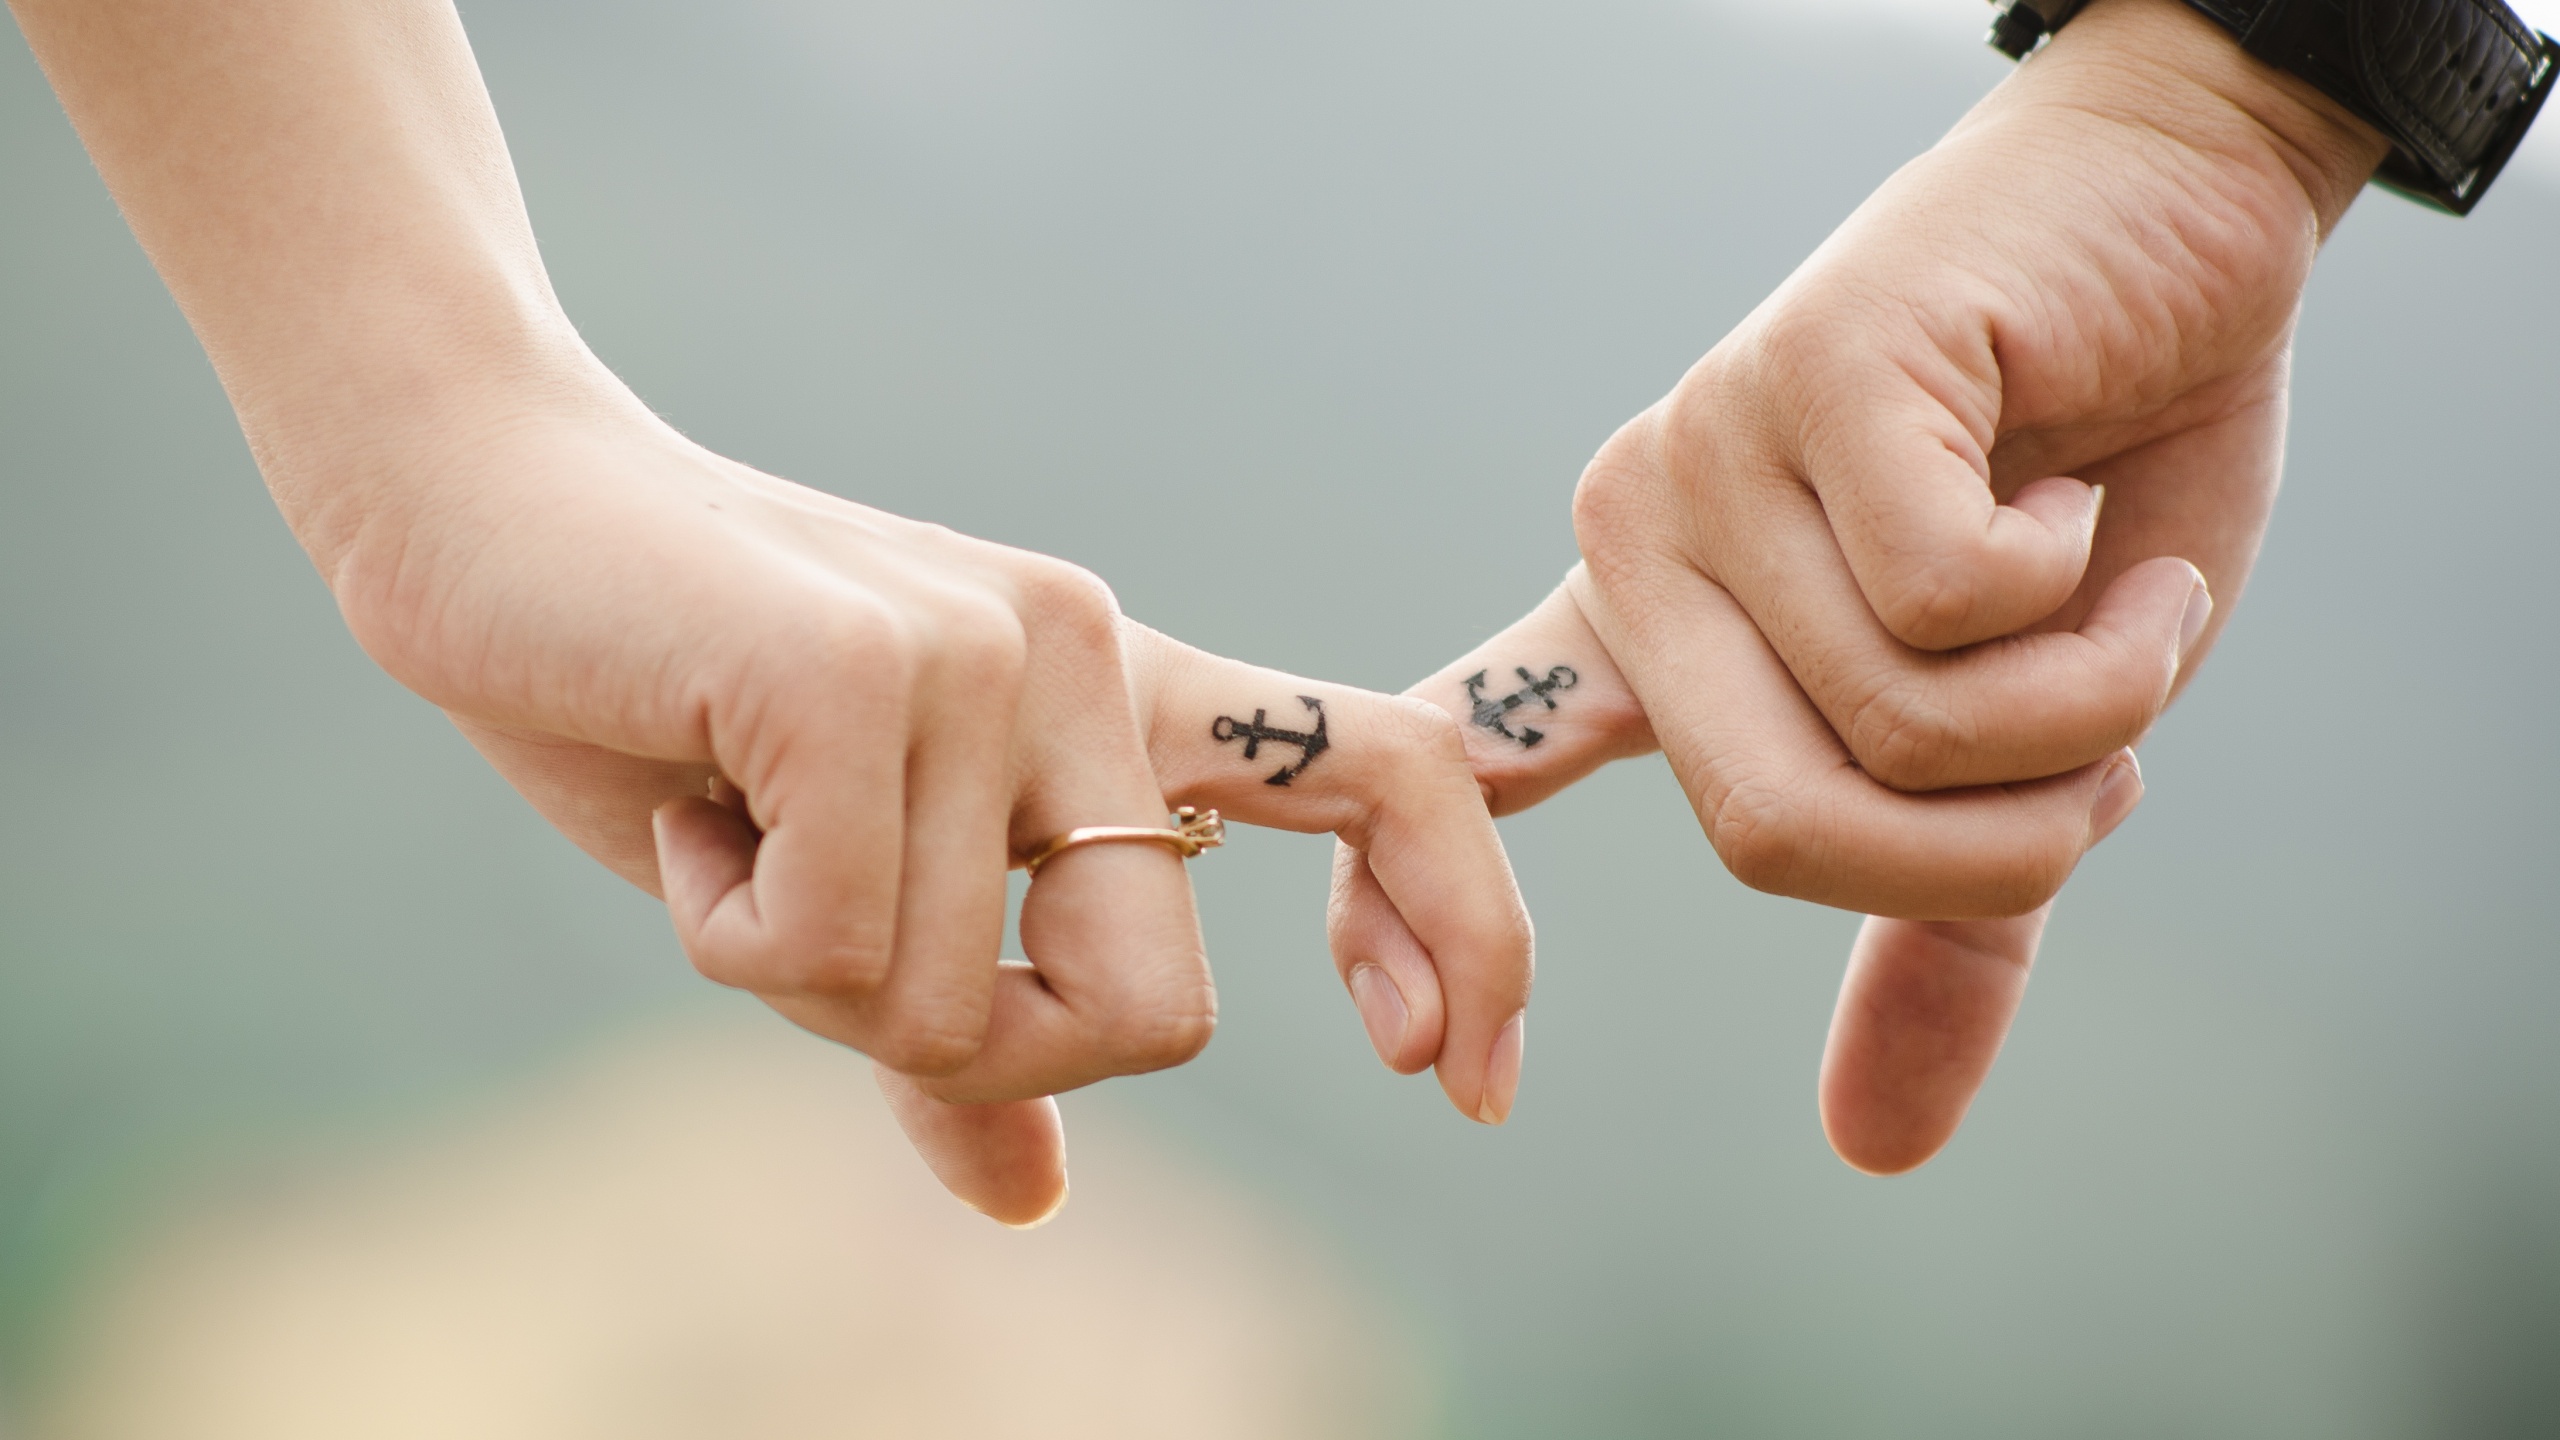 Couple, Hands together, Fingers, Youth, Romantic, Lovers, 5K.